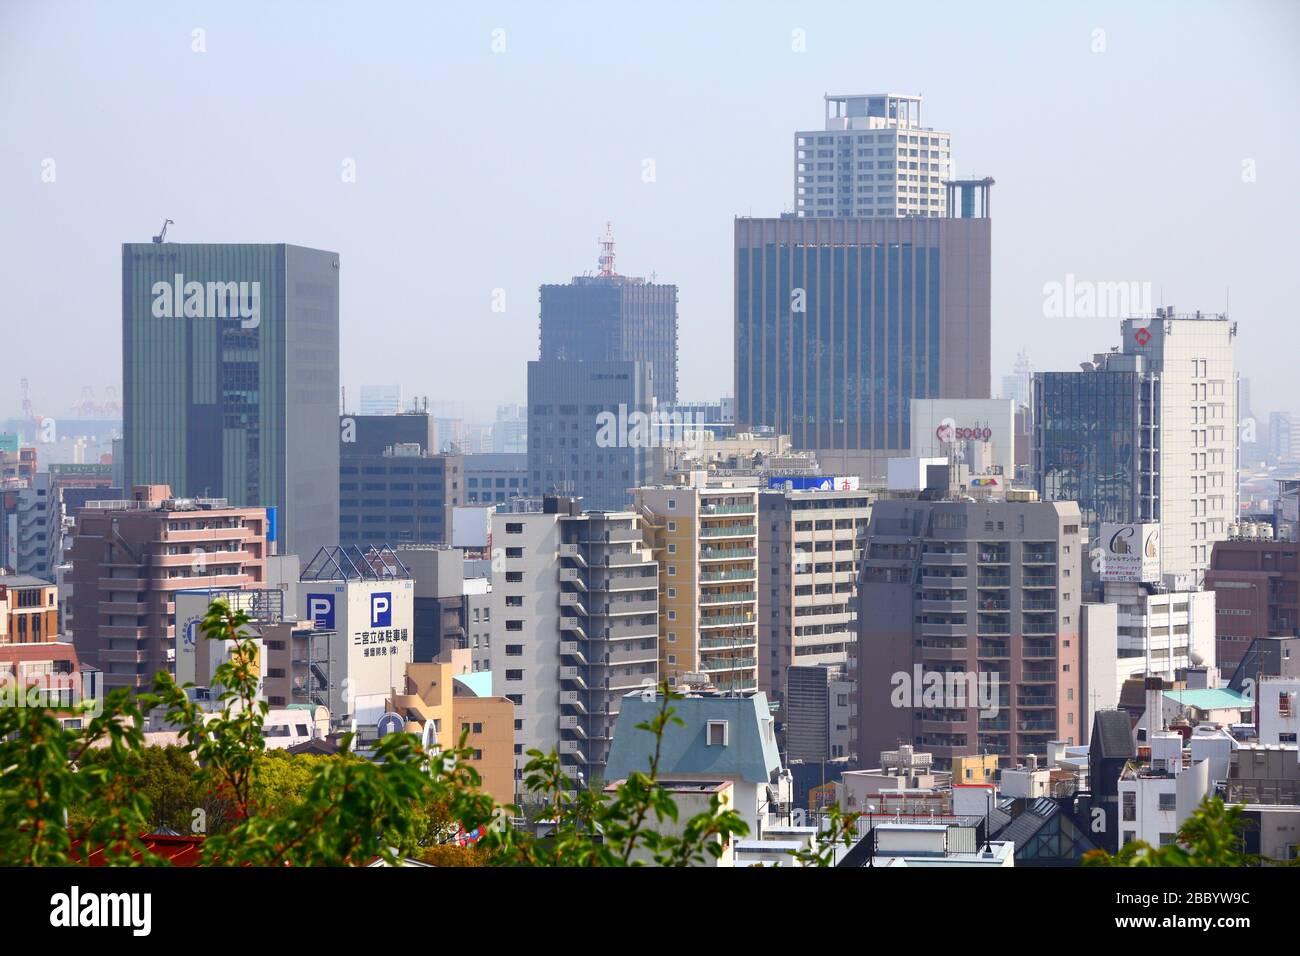 KOBE, JAPAN - APRIL 24, 2012: Skyline view of Kobe, Japan. Kobe is the 6th largest city of Japan, with population of 1.5m. Stock Photo